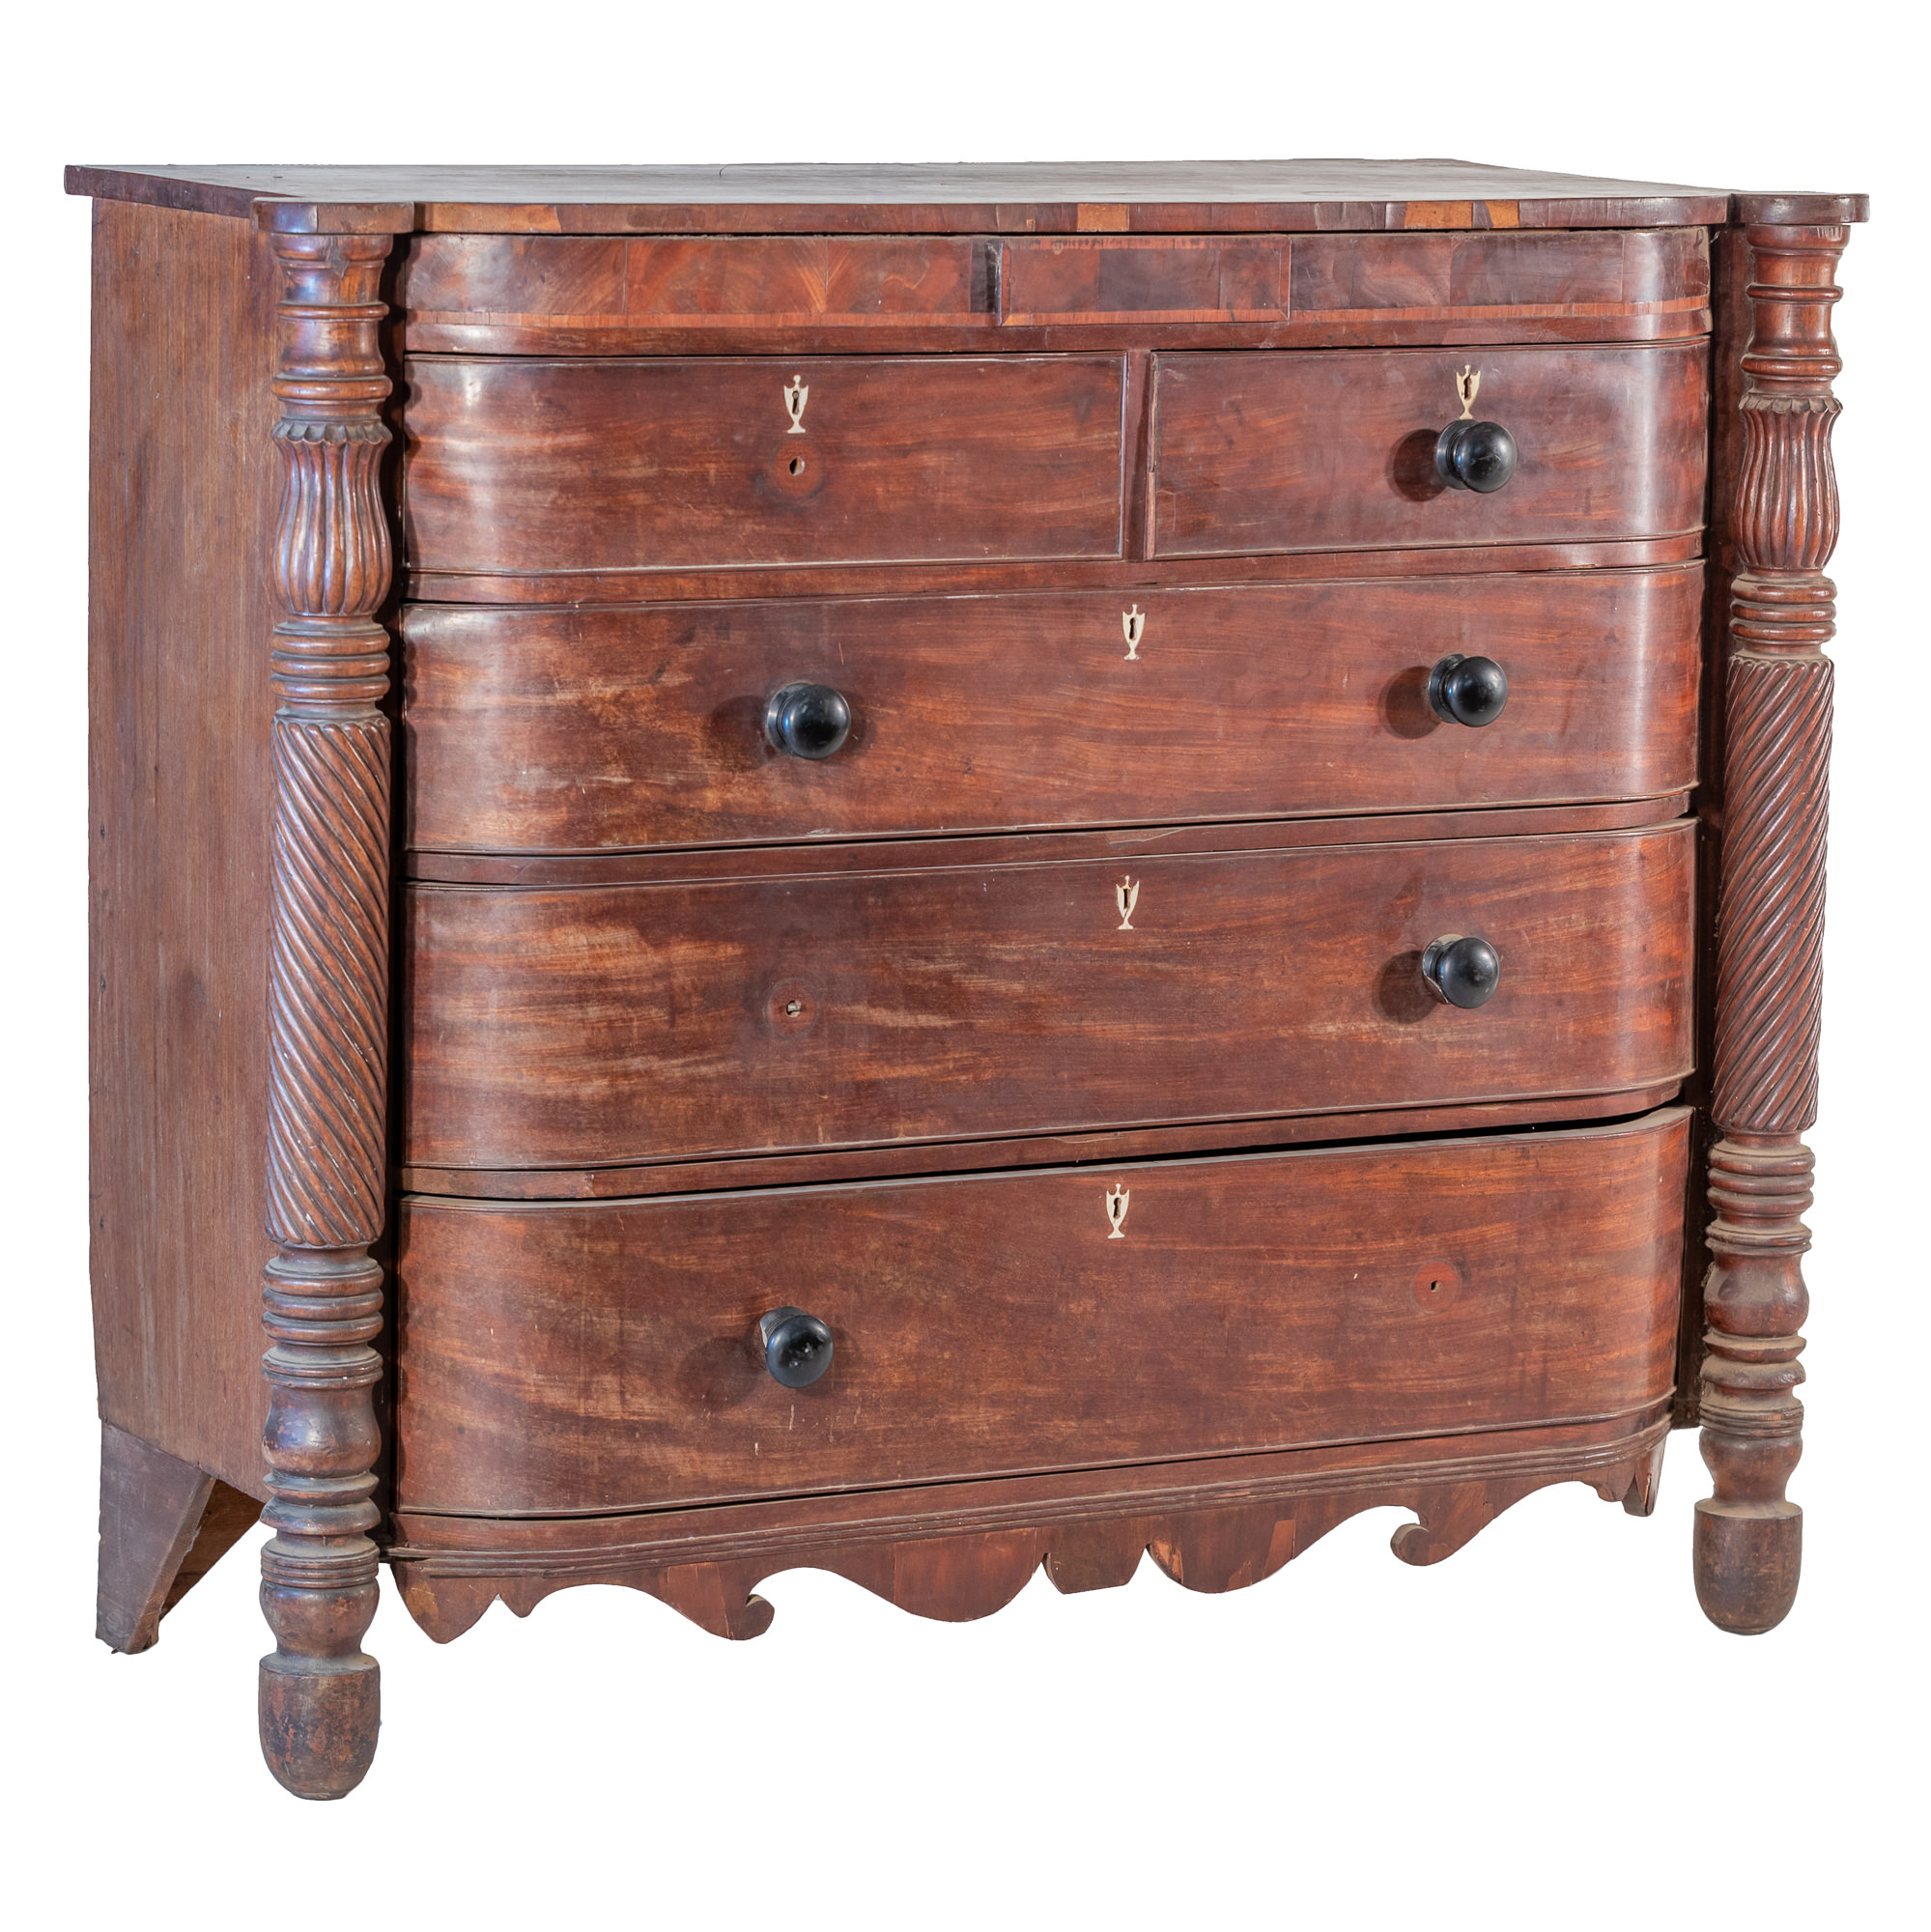 'Substantial William IV Scottish Mahogany Bowfront Chest of Drawers Circa 1835'